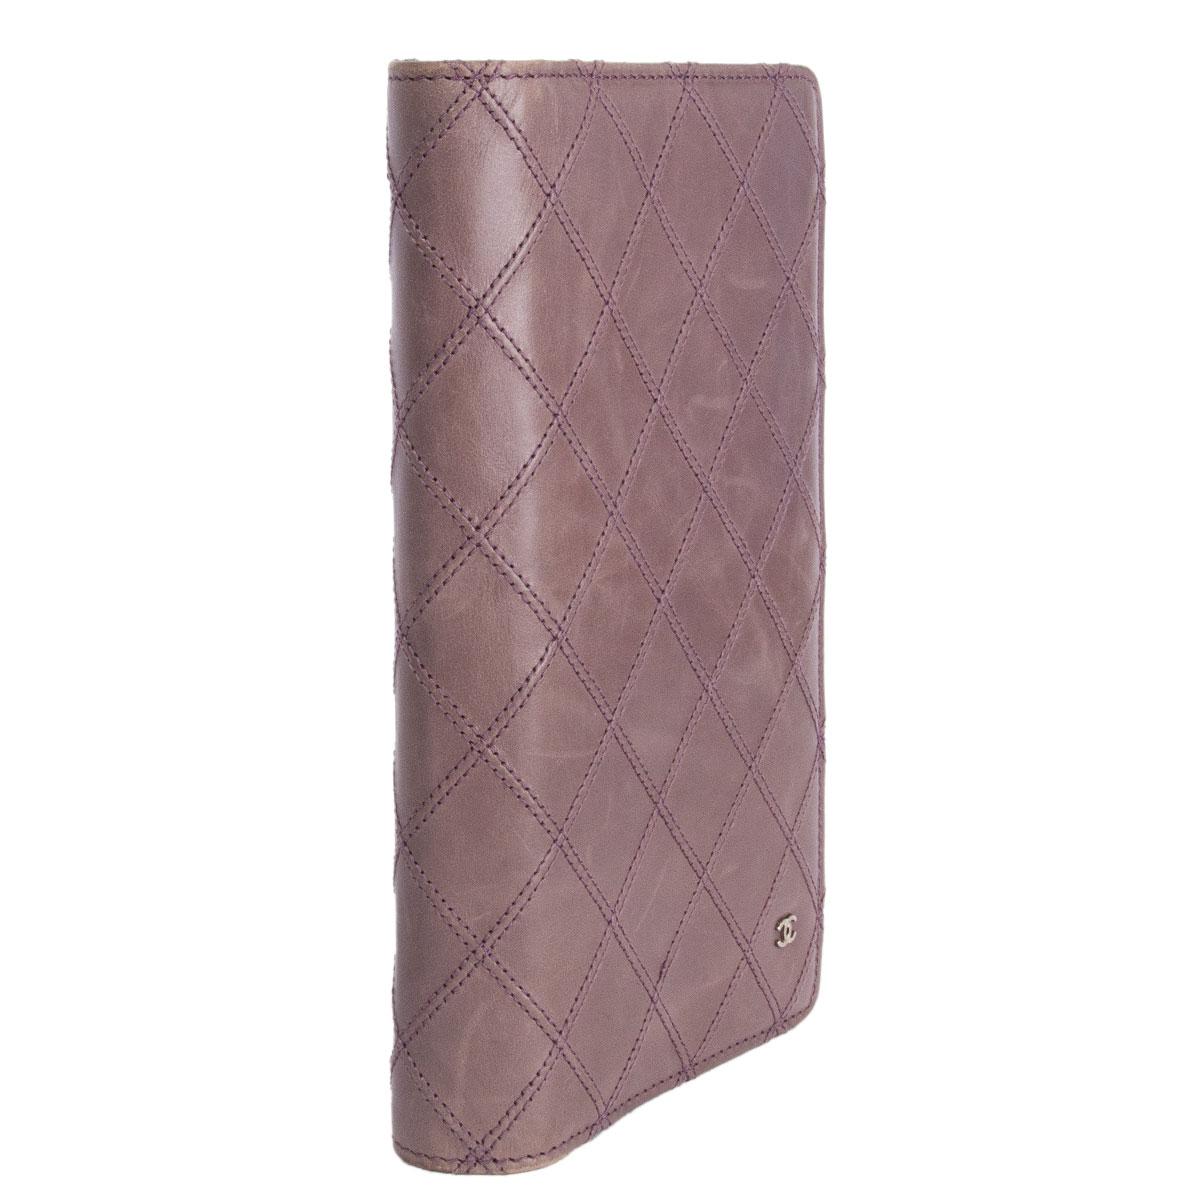 100% authentic Chanel quilted long flap wallet in lavender smooth leather. Contains 8 card slots and five open compartments with one zipper coin pocket. Has never been carried however the outside leather has a soft  discoloration compared to the